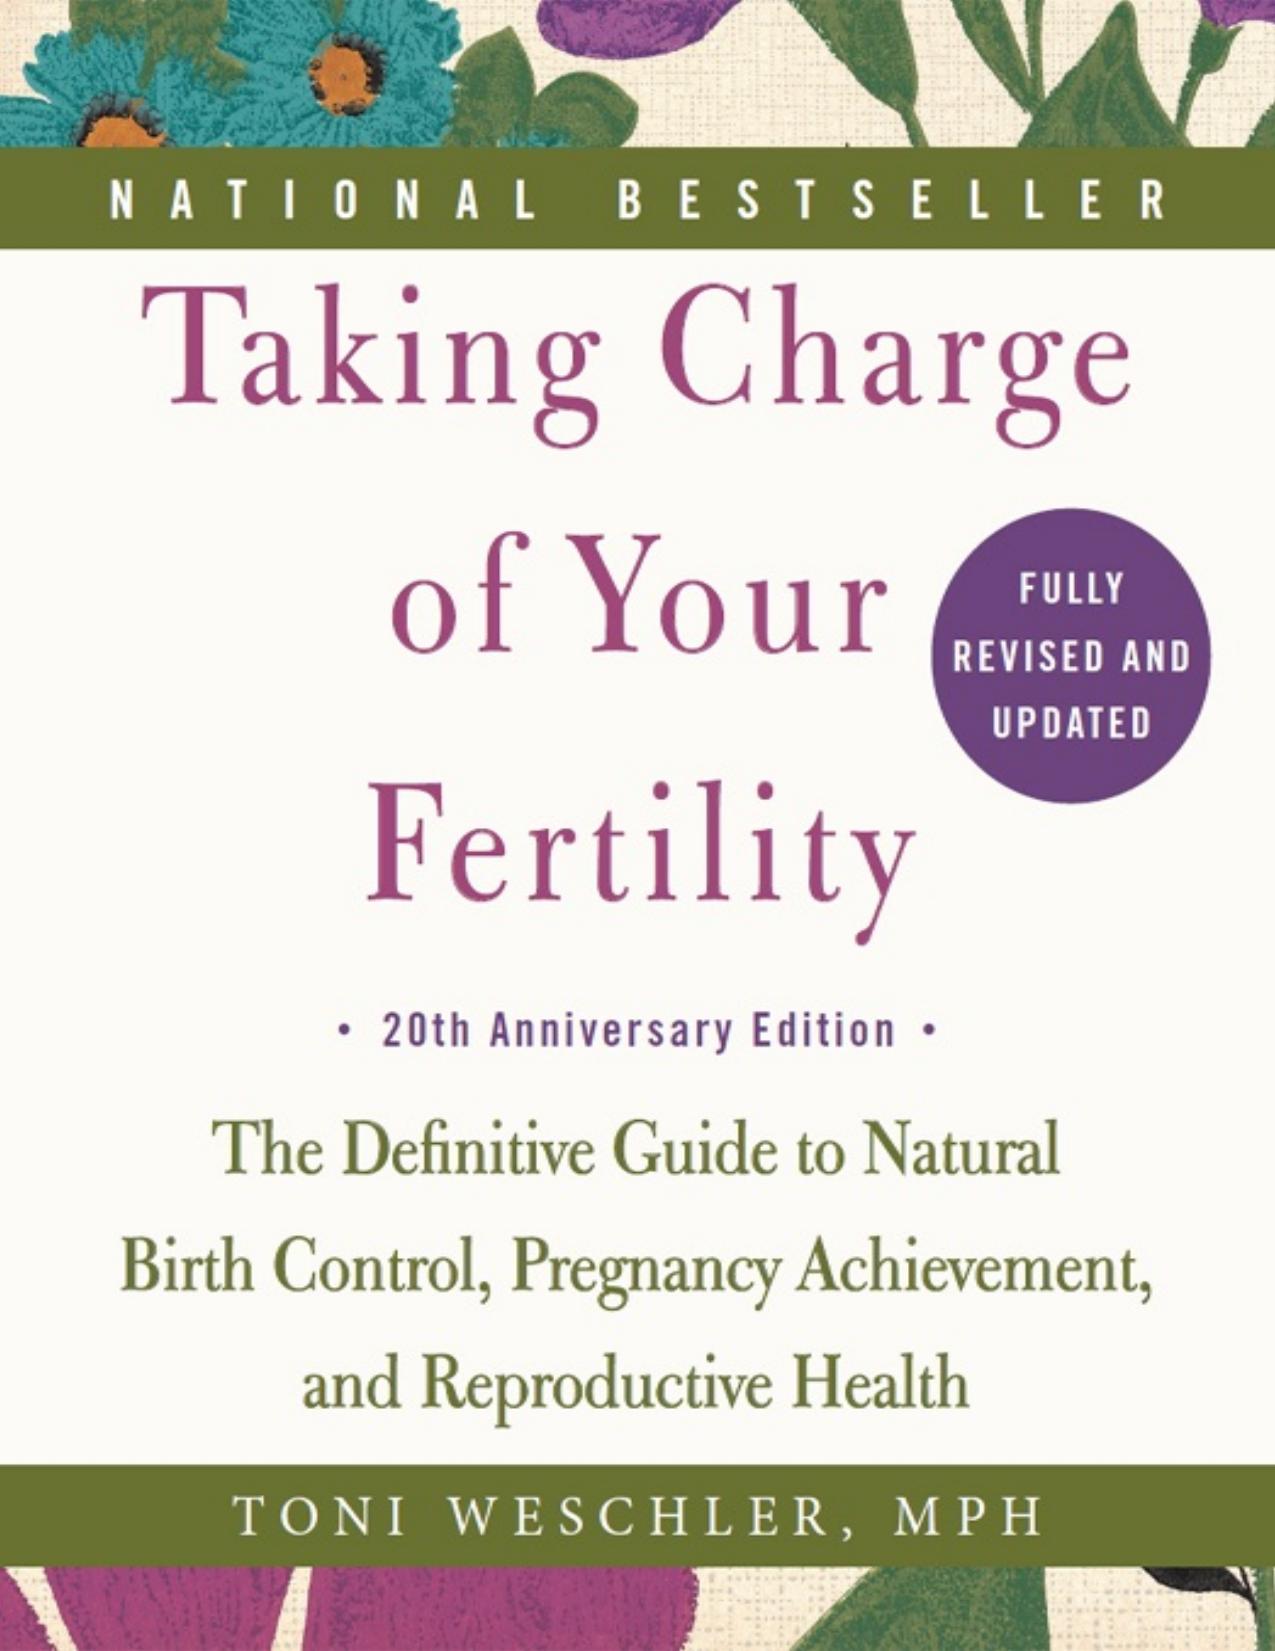 Taking Charge of Your Fertility: The Definitive Guide to Natural Birth Control, Pregnancy Achievement, and Reproductive Health - PDFDrive.com